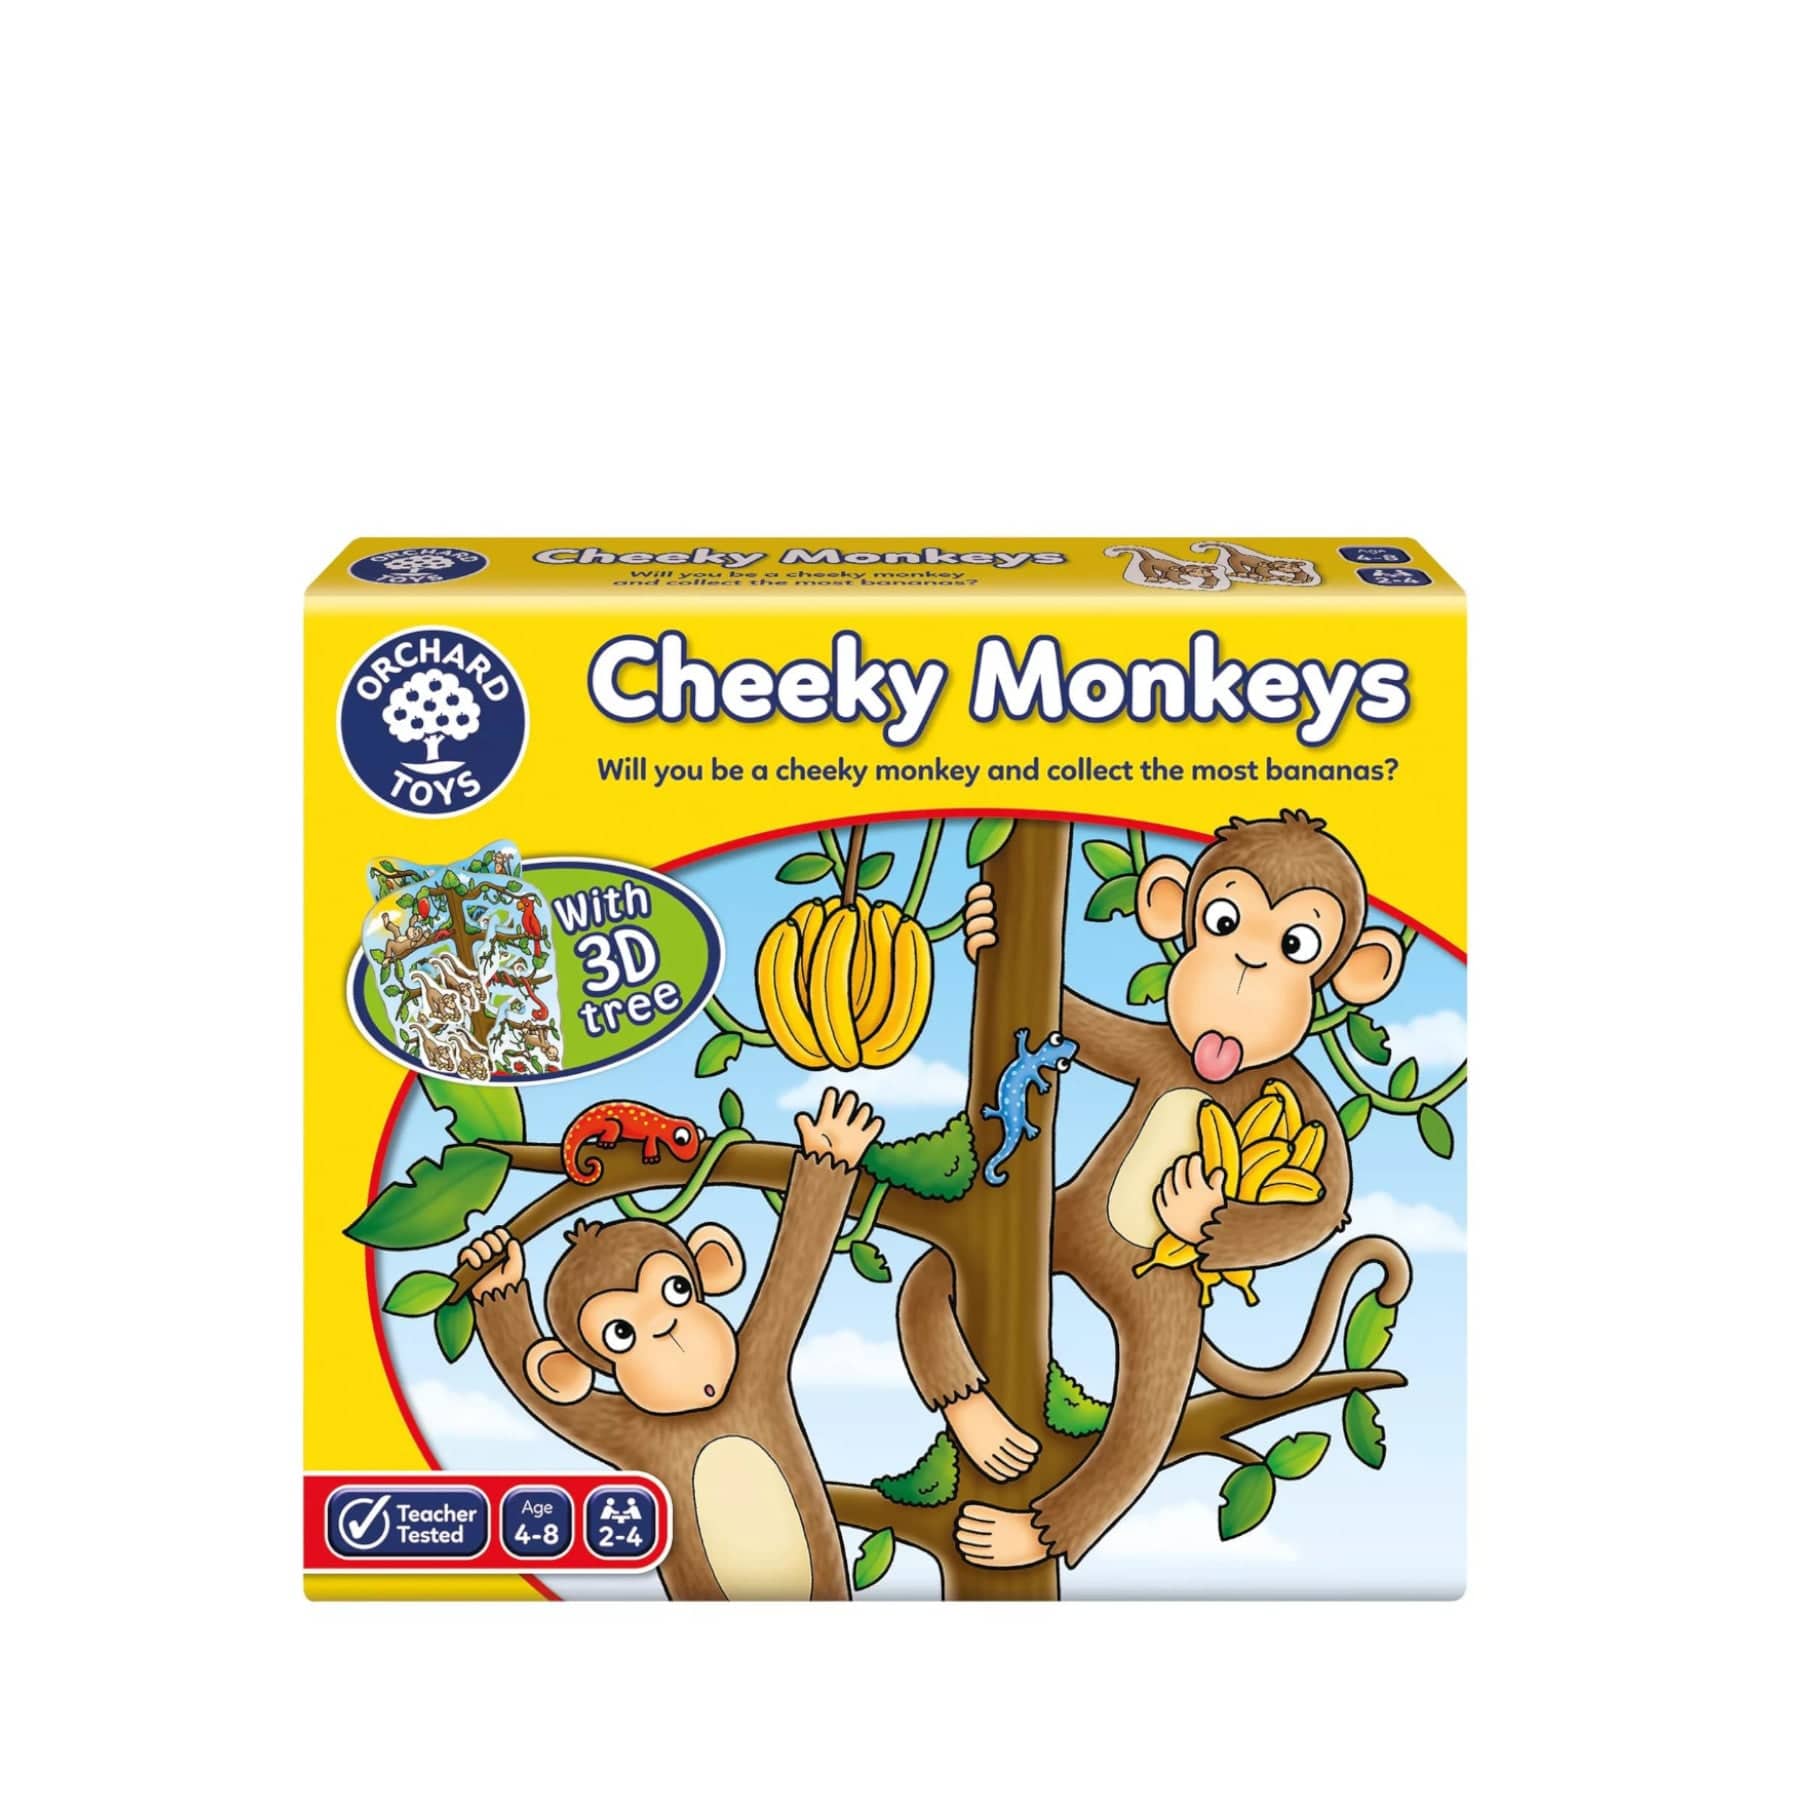 Cheeky Monkeys board game box by Orchard Toys featuring playful monkeys collecting bananas, with a colorful tree illustration, targeted for children ages 4-8